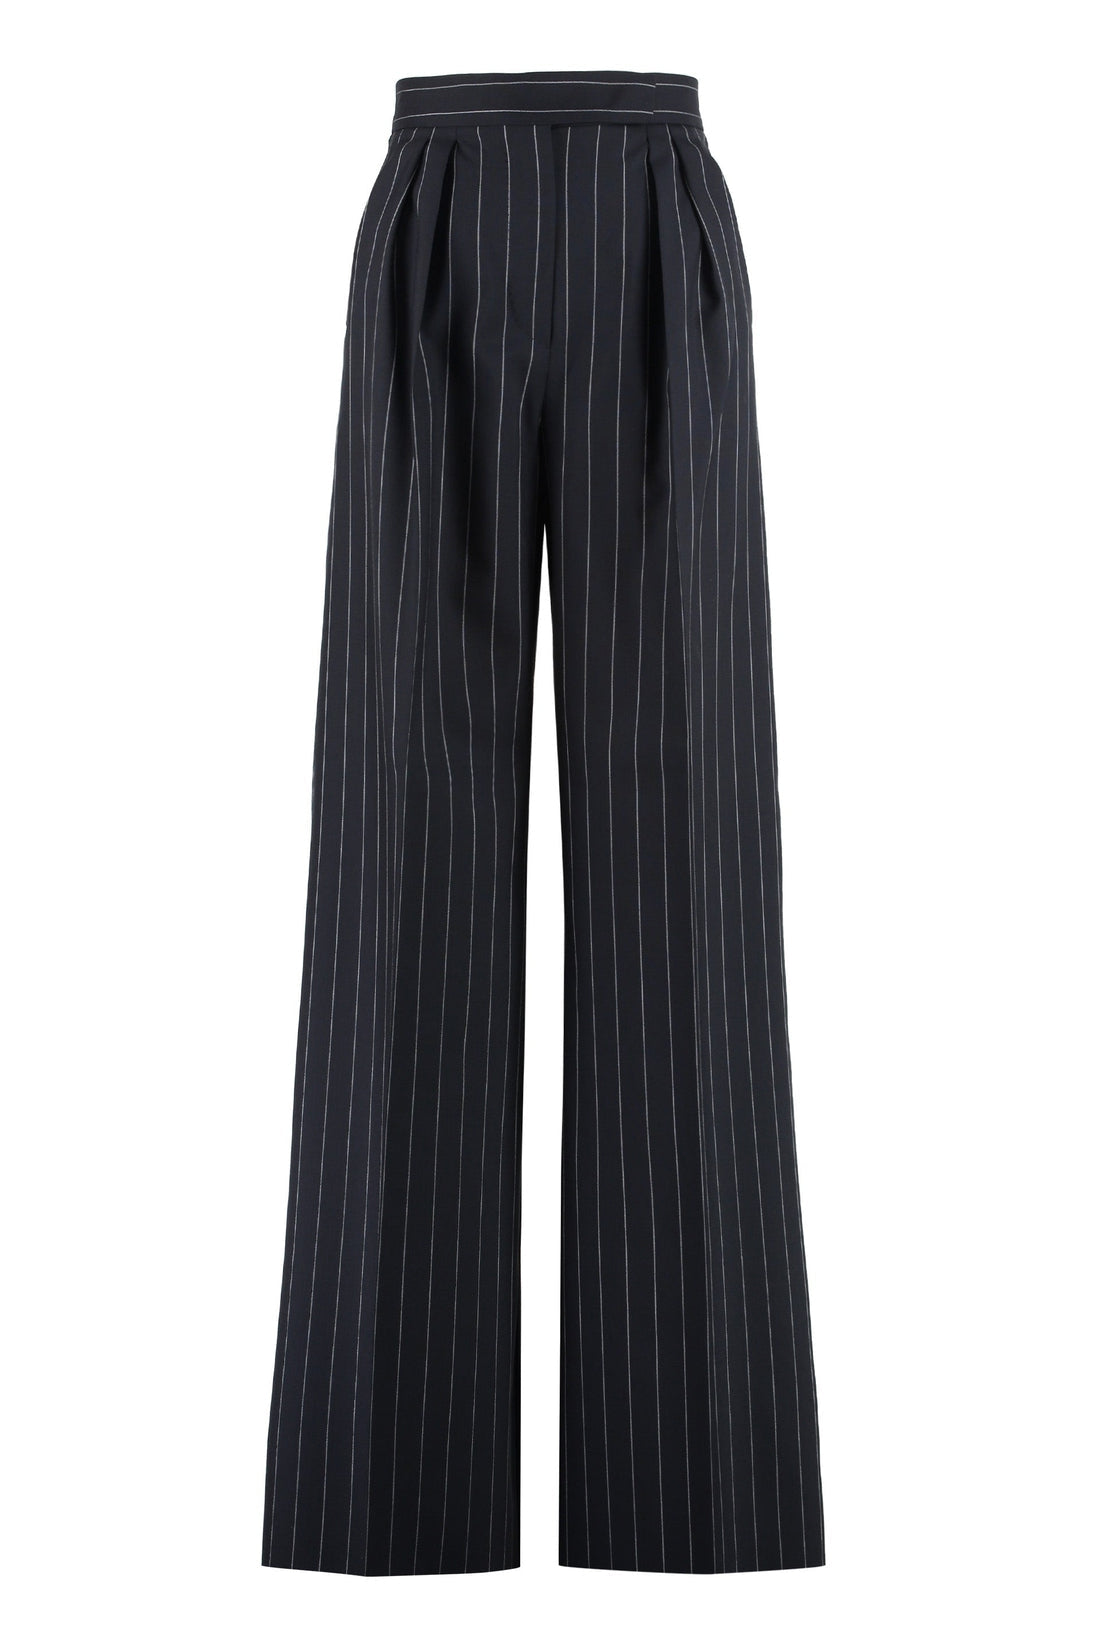 Max Mara-OUTLET-SALE-Xavier pinstriped wool trousers-ARCHIVIST